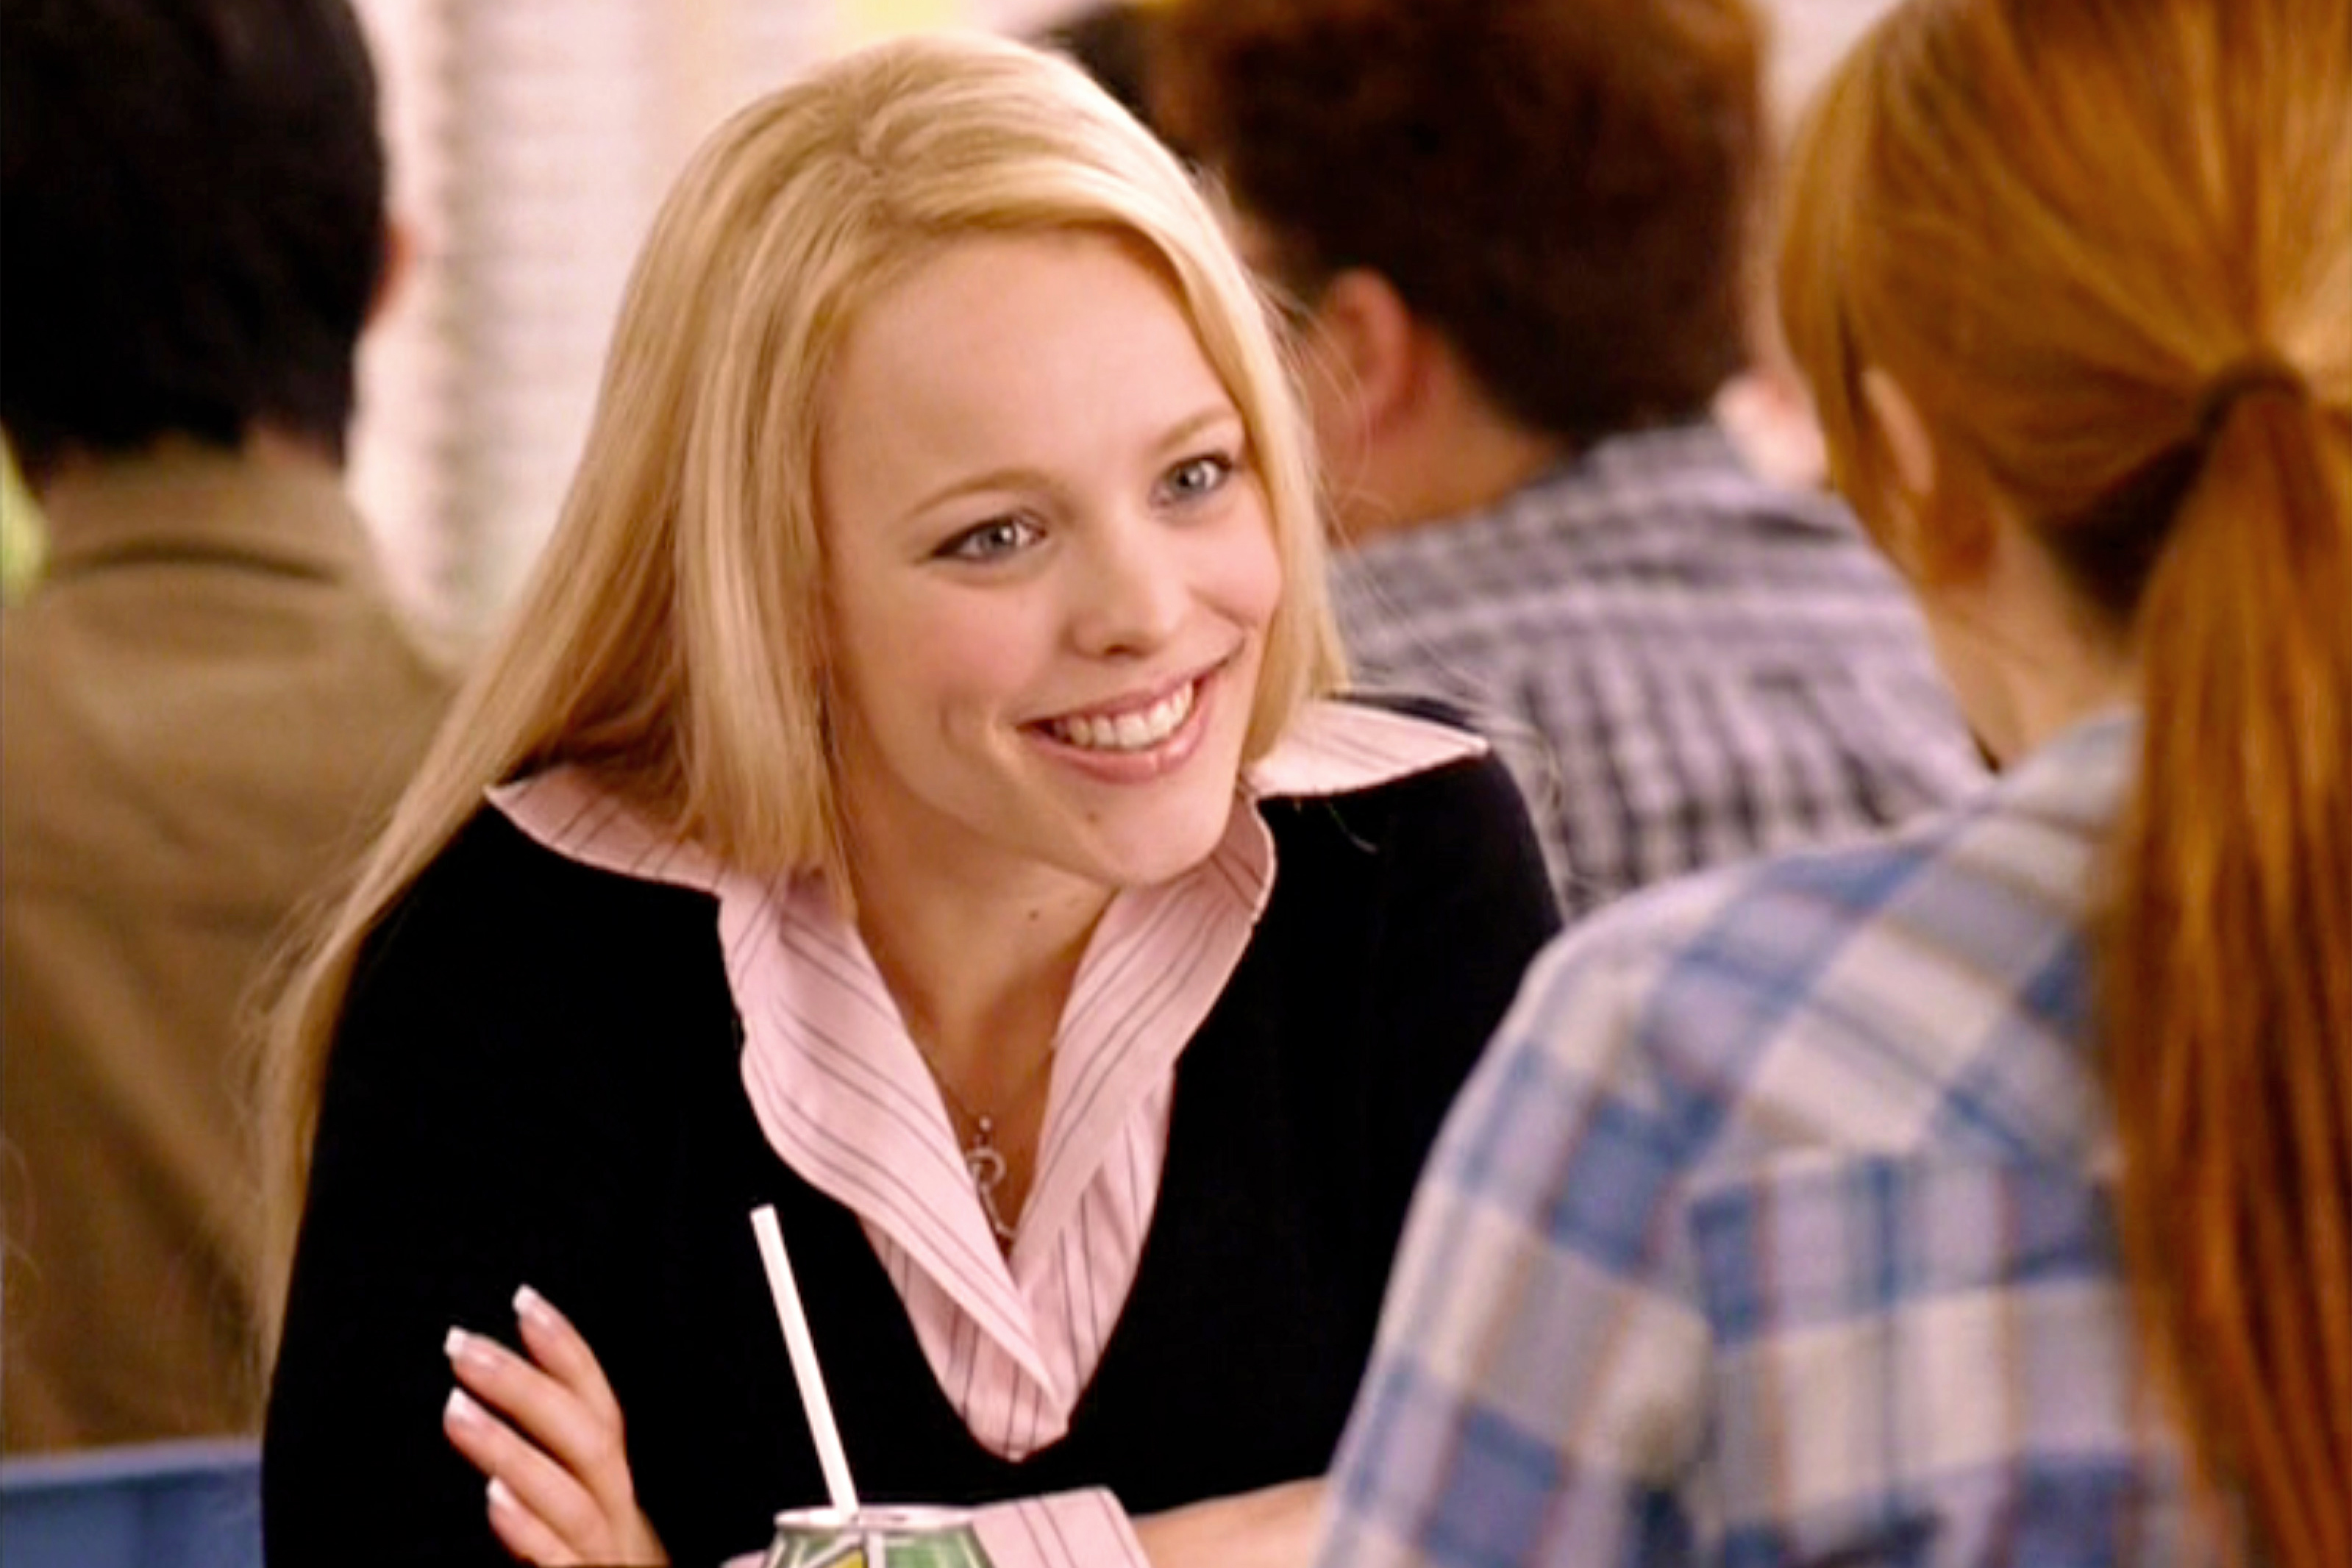 film still "Mean Girls", directed by Mark Waters